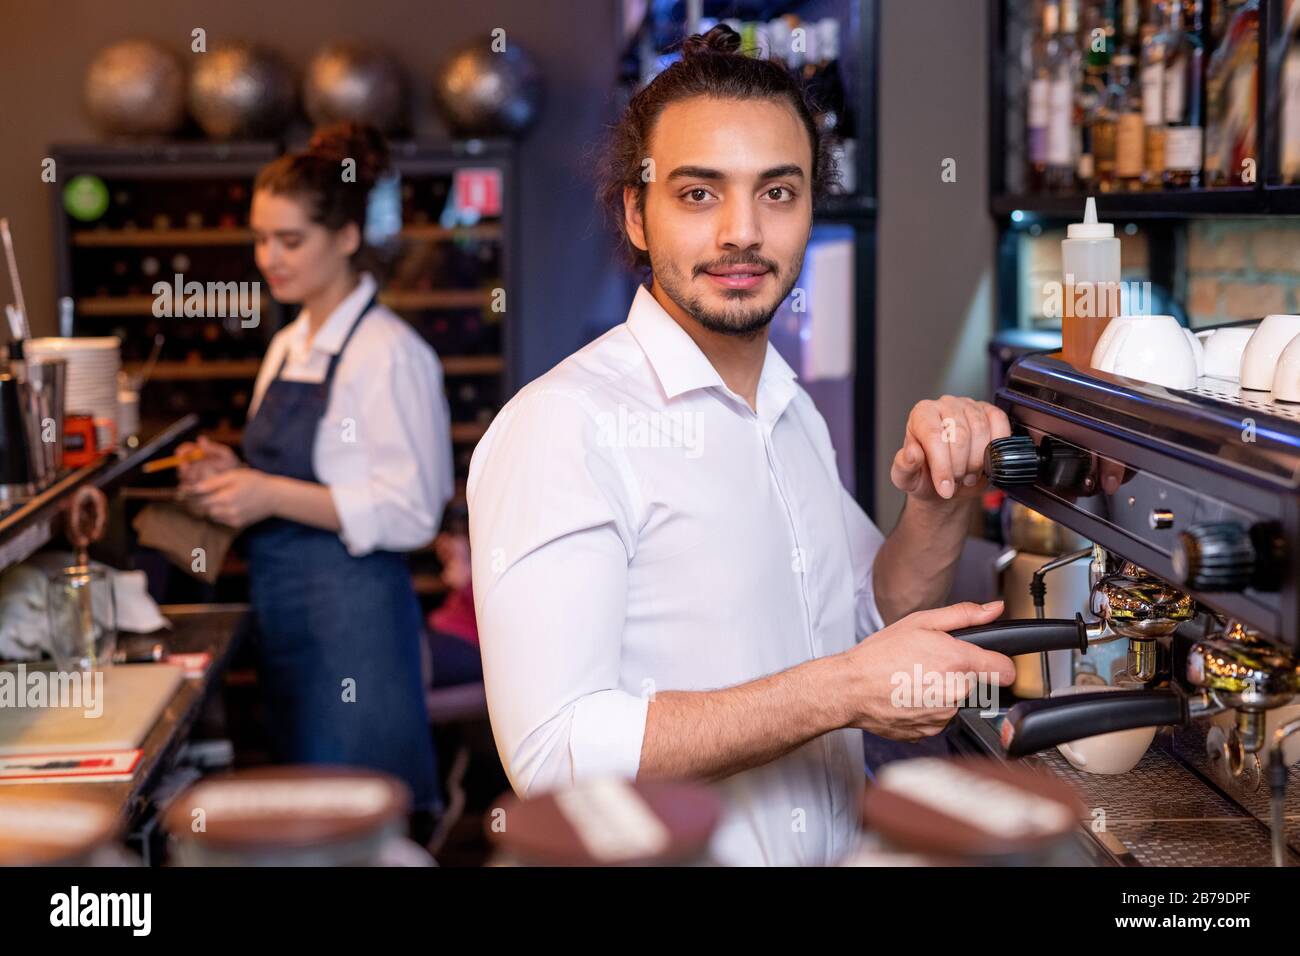 Young handsome waiter in white shirt preparing fresh cappuccino by coffee machine while his colleague wiping glass by workplace Stock Photo